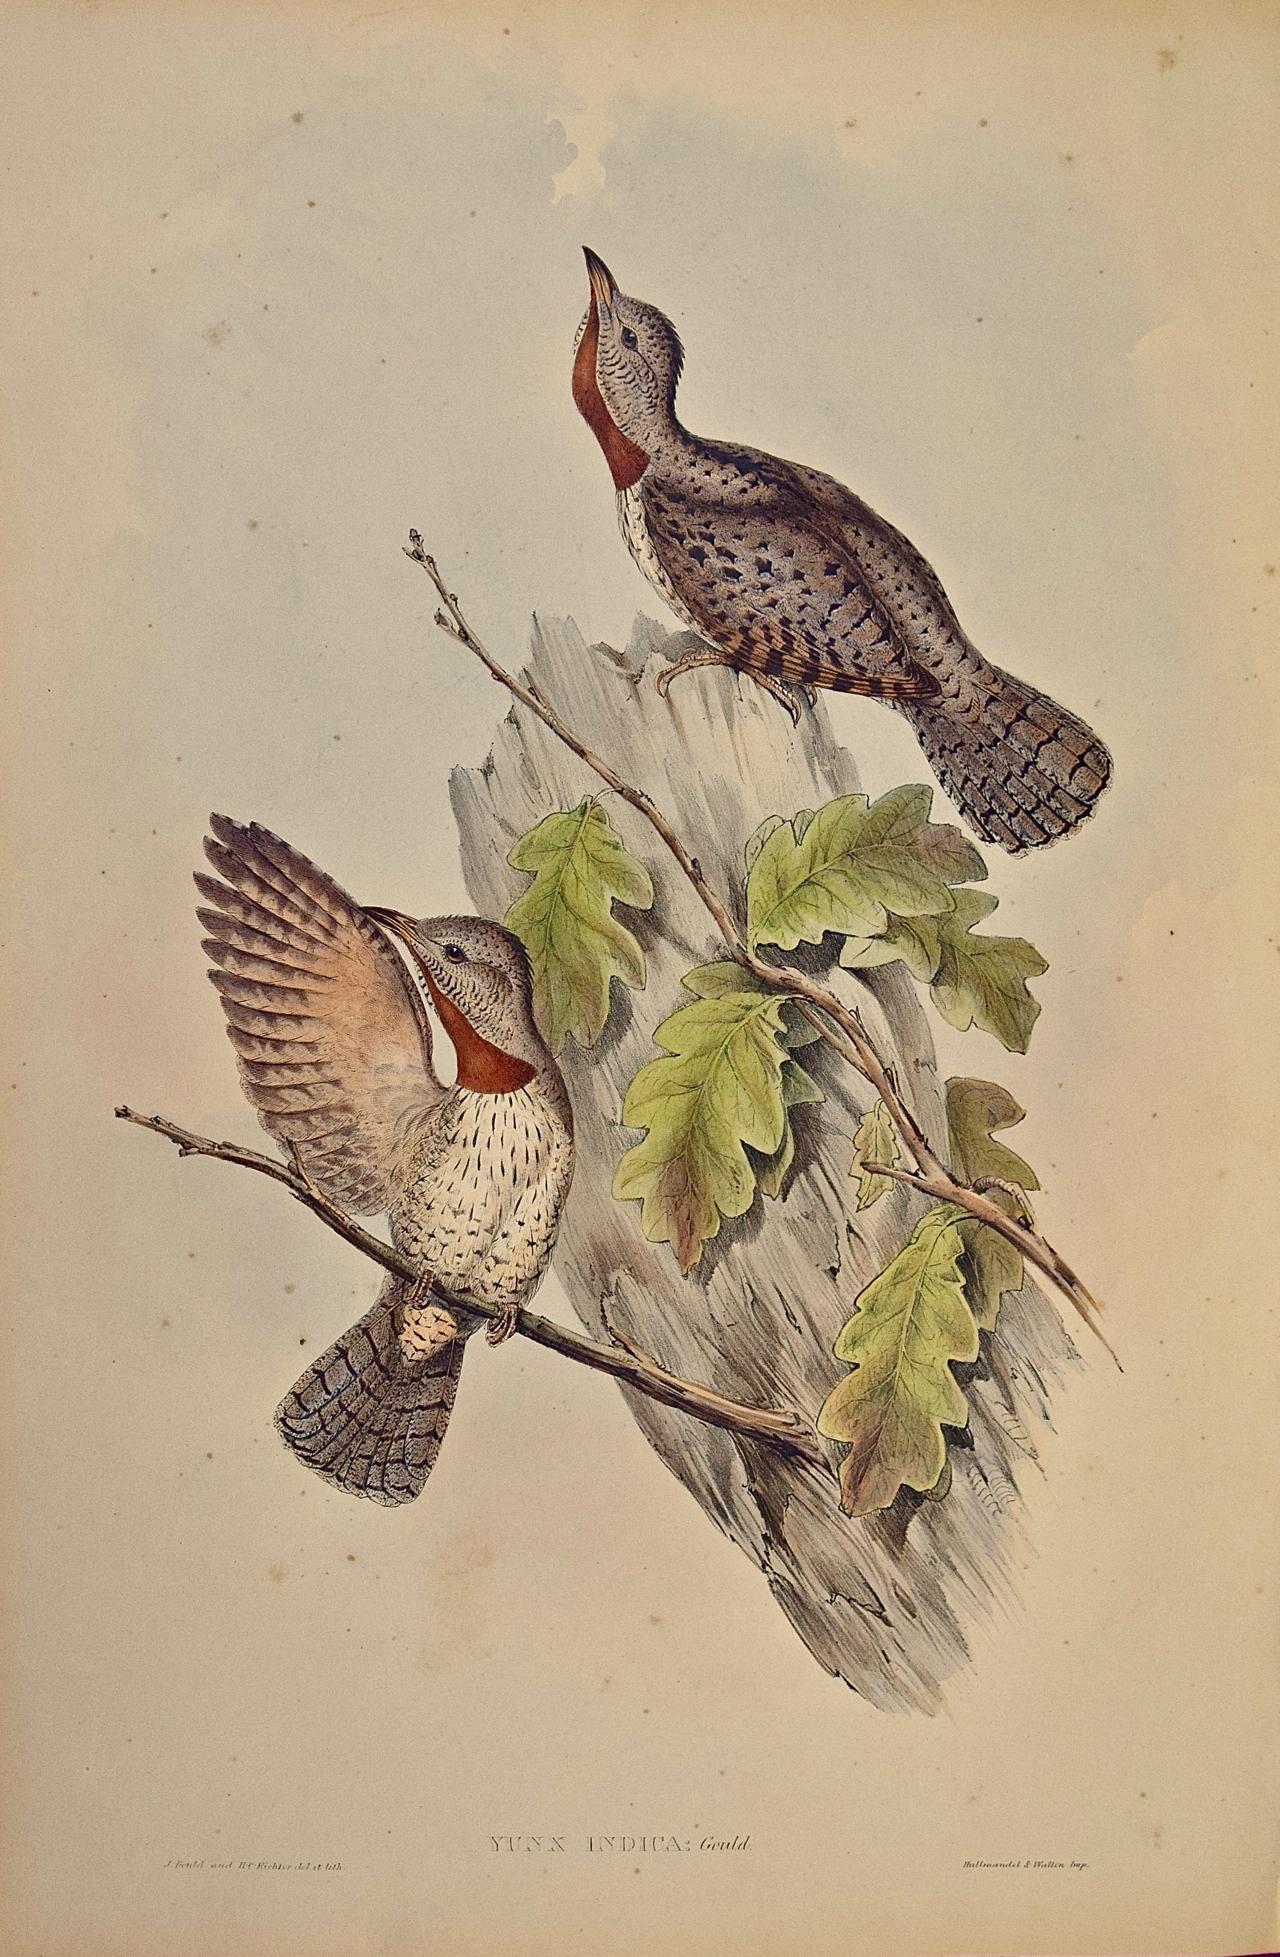 John Gould and Henry Constantine Richter Landscape Print - Indian Wryneck Birds (Yunx indica): A 19th C. Gould Hand-colored Lithograph